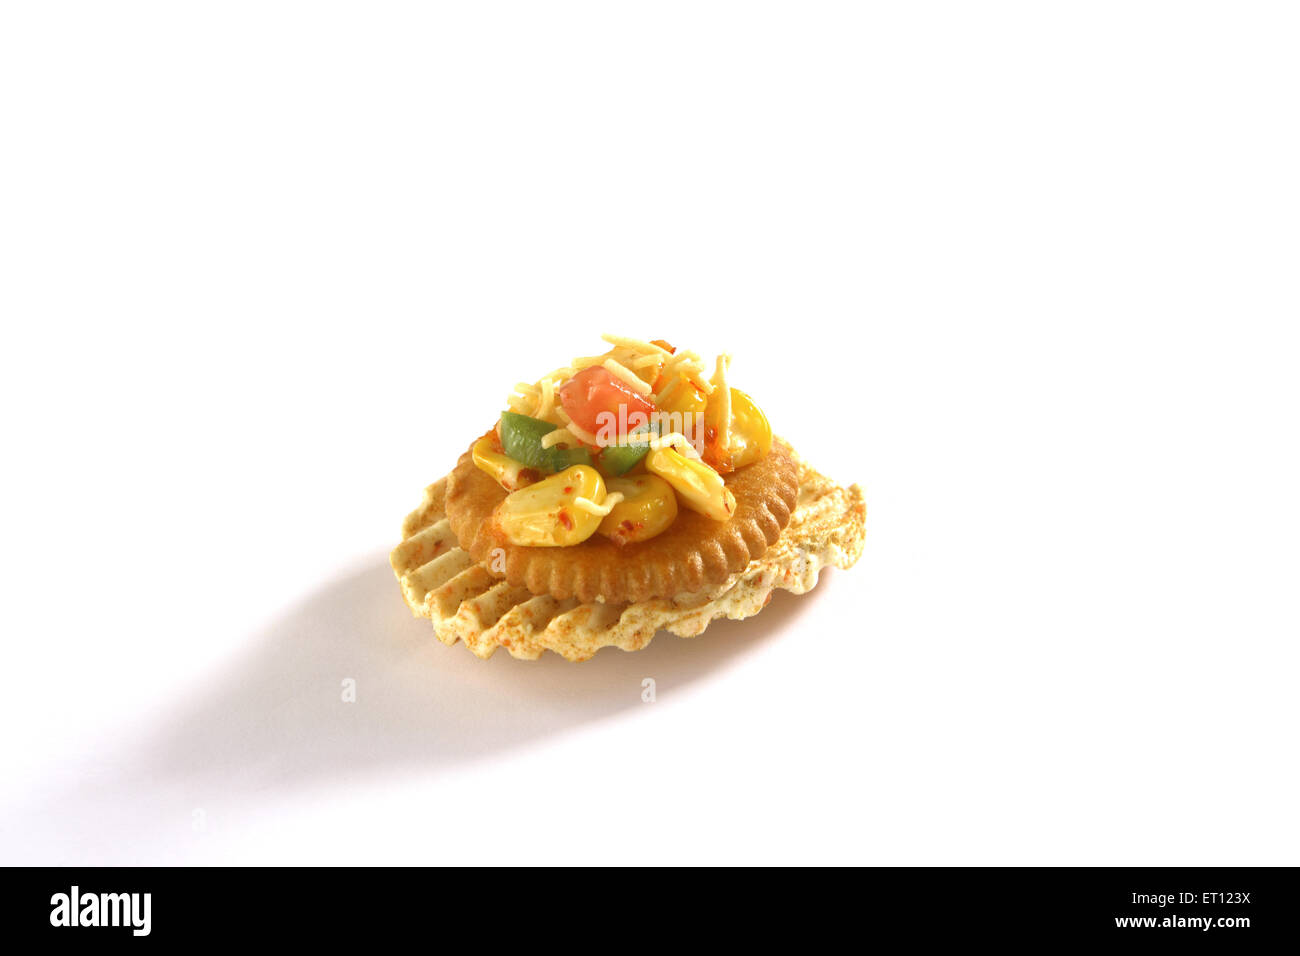 Biscuits crisp salted snack on white background Stock Photo